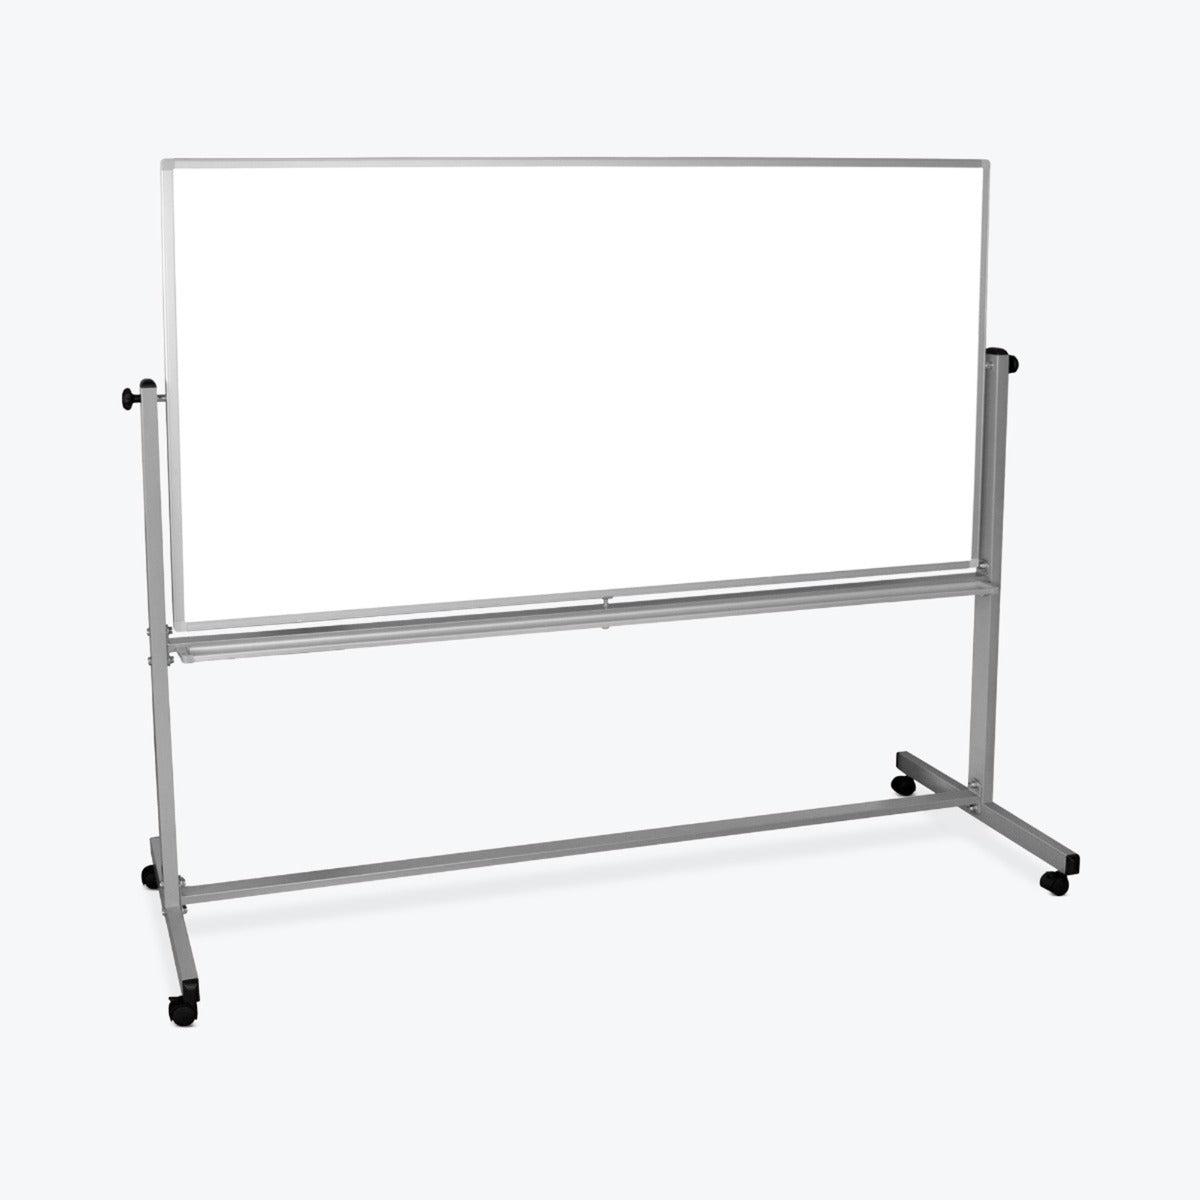 72"W x 40"H Mobile Double-Sided Magnetic Whiteboard